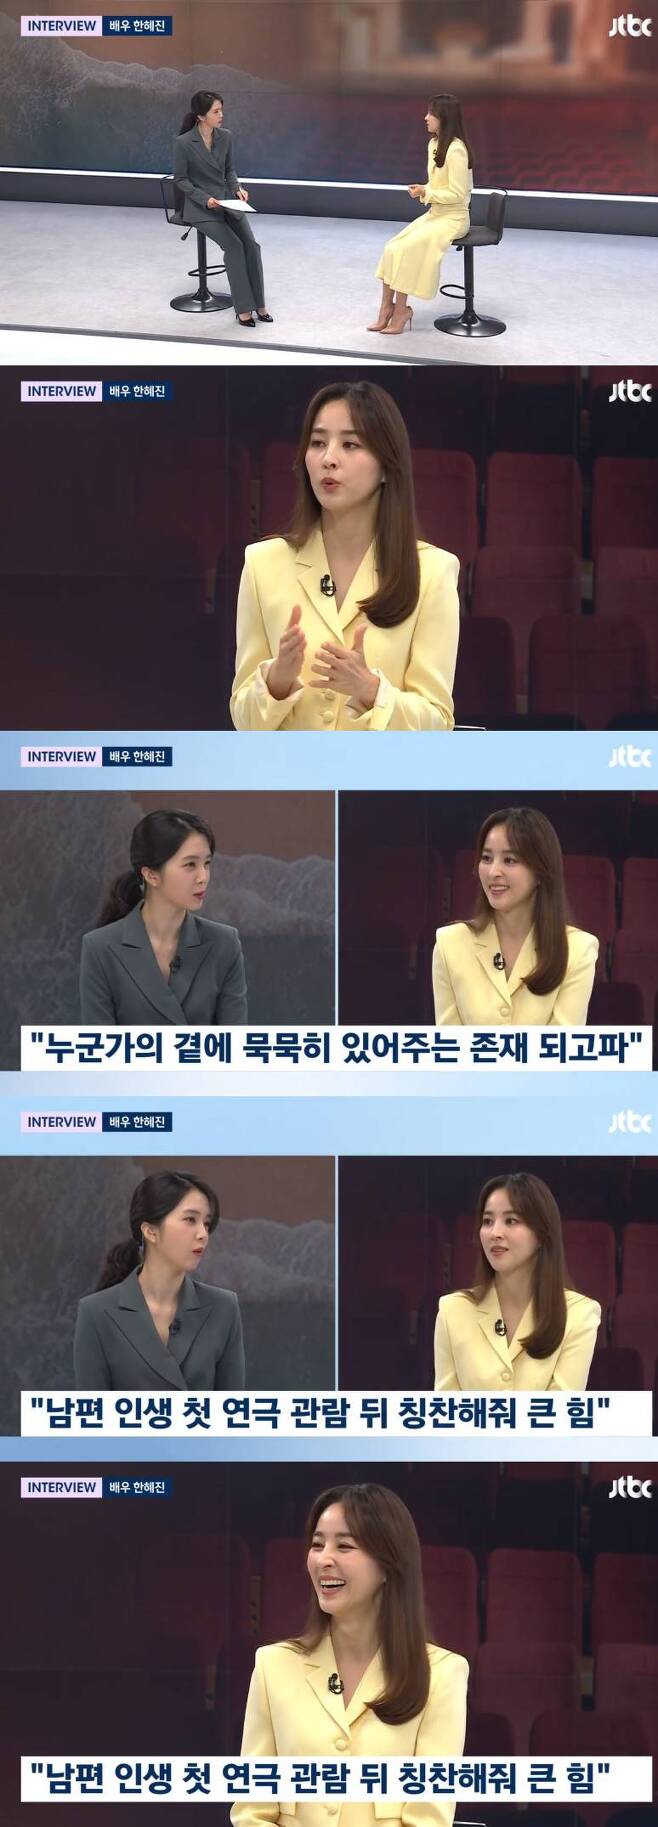 The Newsroom Han Hye-jin showed affection for her husband Ki Sung-yueng and strongly recommended marriage.In the interview section of JTBC The Newsroom broadcasted on the 21st, Han Hye-jin of Play  ⁇  seaside village diary  ⁇  appeared.On this day, Kang Ji-young announcer said, At the beginning of this year, you have returned to the sacred, divorce drama, but this time you are on the stage of play.Han Hye-jin said, I had a desire for a play stage, but it was not easy to get the courage.I was worried that the movie The Village Village Diary was a very good work, but I played it. If this is the case, I would like to take courage and try Top Model before it is too late.As for the ambassador that was powered by Play, there was an ambassador saying, The important thing is just to be there.What is really important is that I just stay with him.  (I realized) Is not my family just a force to be by my side?  I should be a person who is really silent to someone. Ive been thinking about these things, he said.Kang Announcer said, Ki Sung-yueng also cheered while mentioning that he was proud and too good.Han Hye-jin said, I am taking care of my child a lot, and that is a great strength for me. This is the first time Ive seen Play. The first play of my life is my Play.It is a great power to praise the actors characters as if they are alive. Announcer Kang said, Just by being next to me, I would like to say, Oh, Im getting this much power, and Han Hye-jin laughed, saying, Thats right. Its really encouraging. I recommend marriage.As for the merits of marriage, he said, I will blame someone together.Meanwhile, Han Hye-jin gave birth to Ms Xiong in September 2015 after marrying footballer Ki Sung-yueng in 2013.Recently, Han Hye-jin and Ki Sung-yuengs daughters appearance were mentioned in KBS 2TV The Problem Son of the Rooftop Room and SBS Power FM Park Ha-suns Cine Town.Park Ha-sun praised it as a hard-to-live appearance, and Han Hye-jin said she resembled herself and her husband.Photo: DB, JTBC broadcast screen